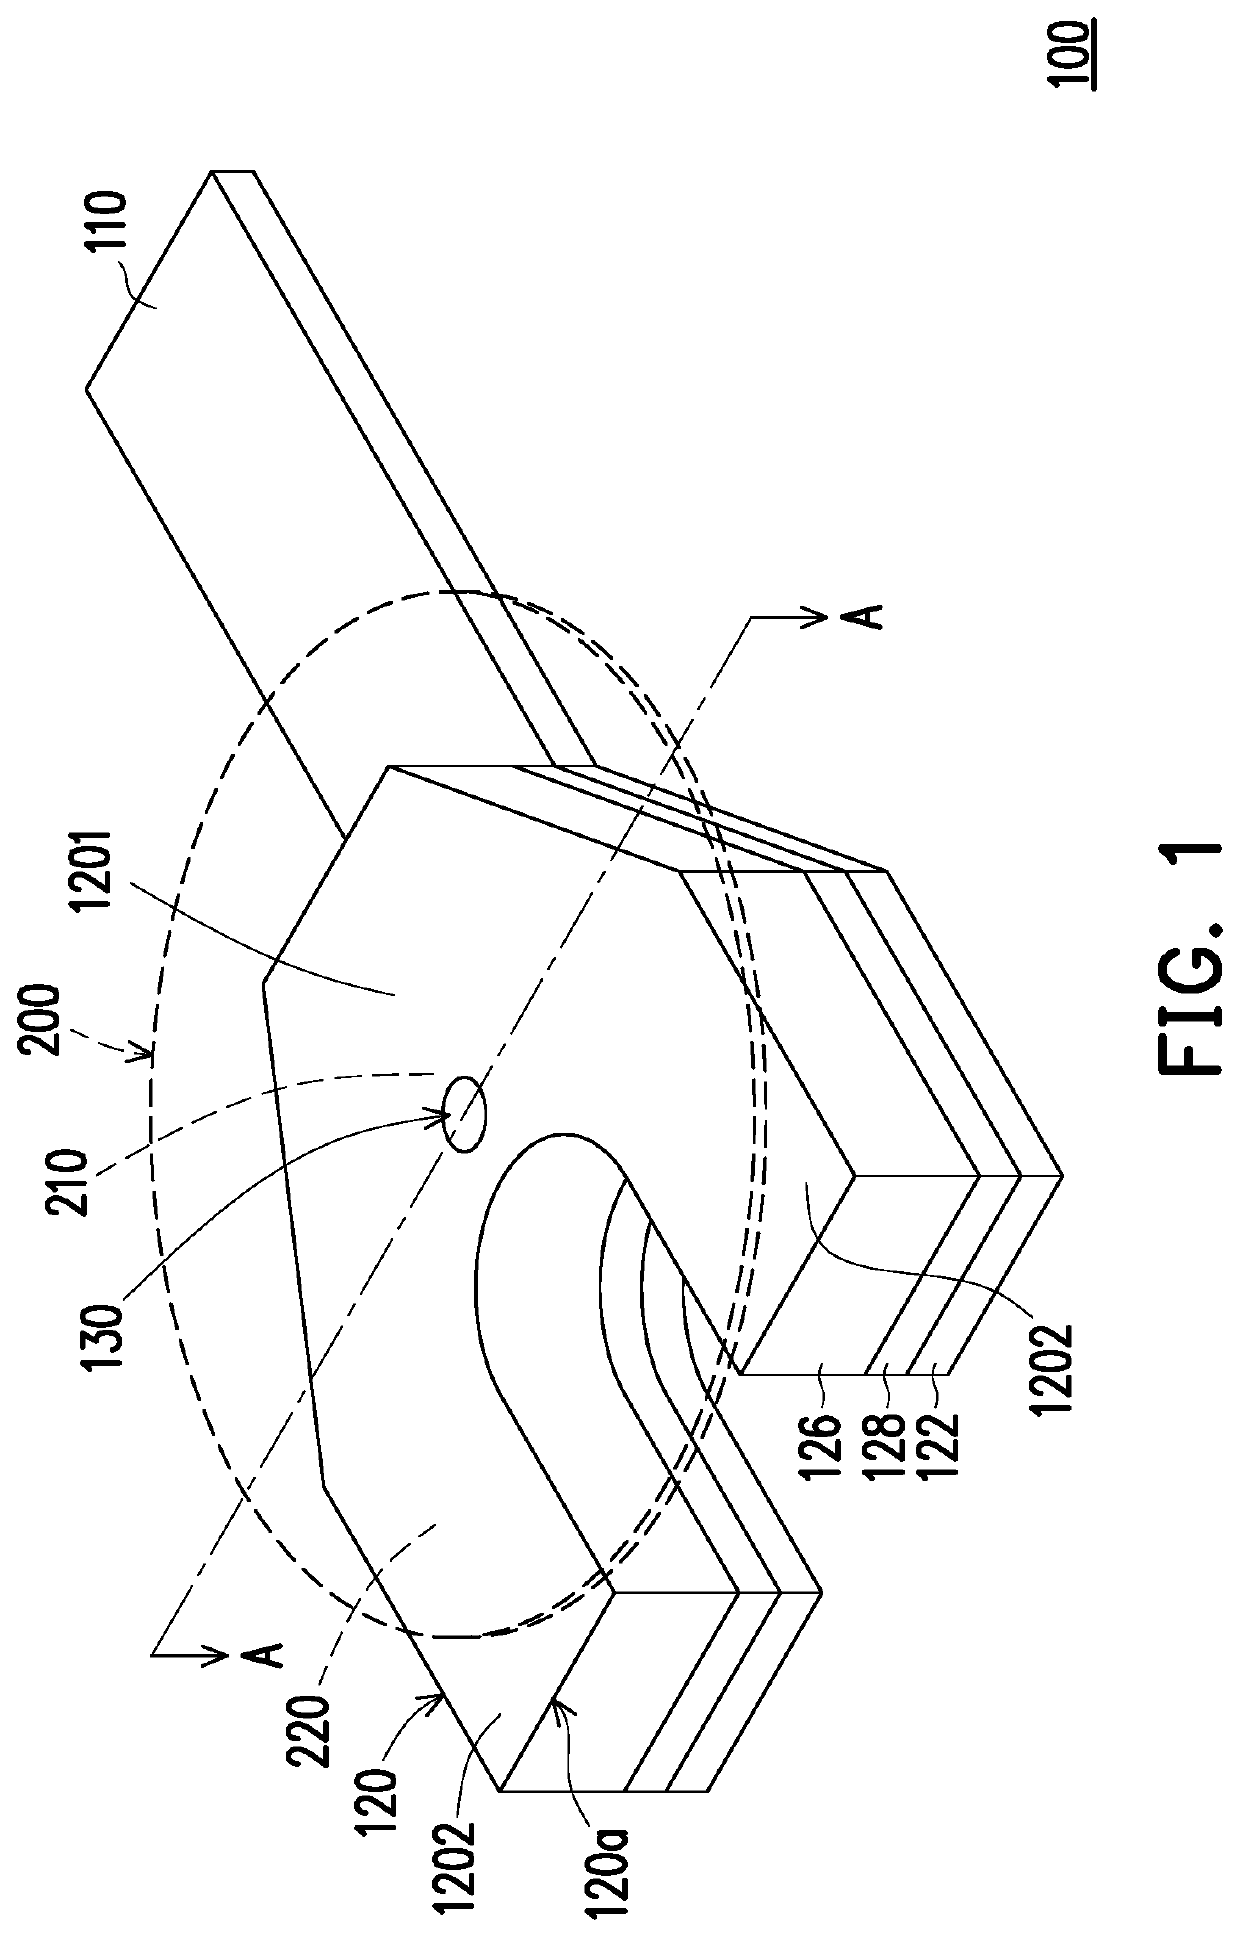 Wafer transferring device